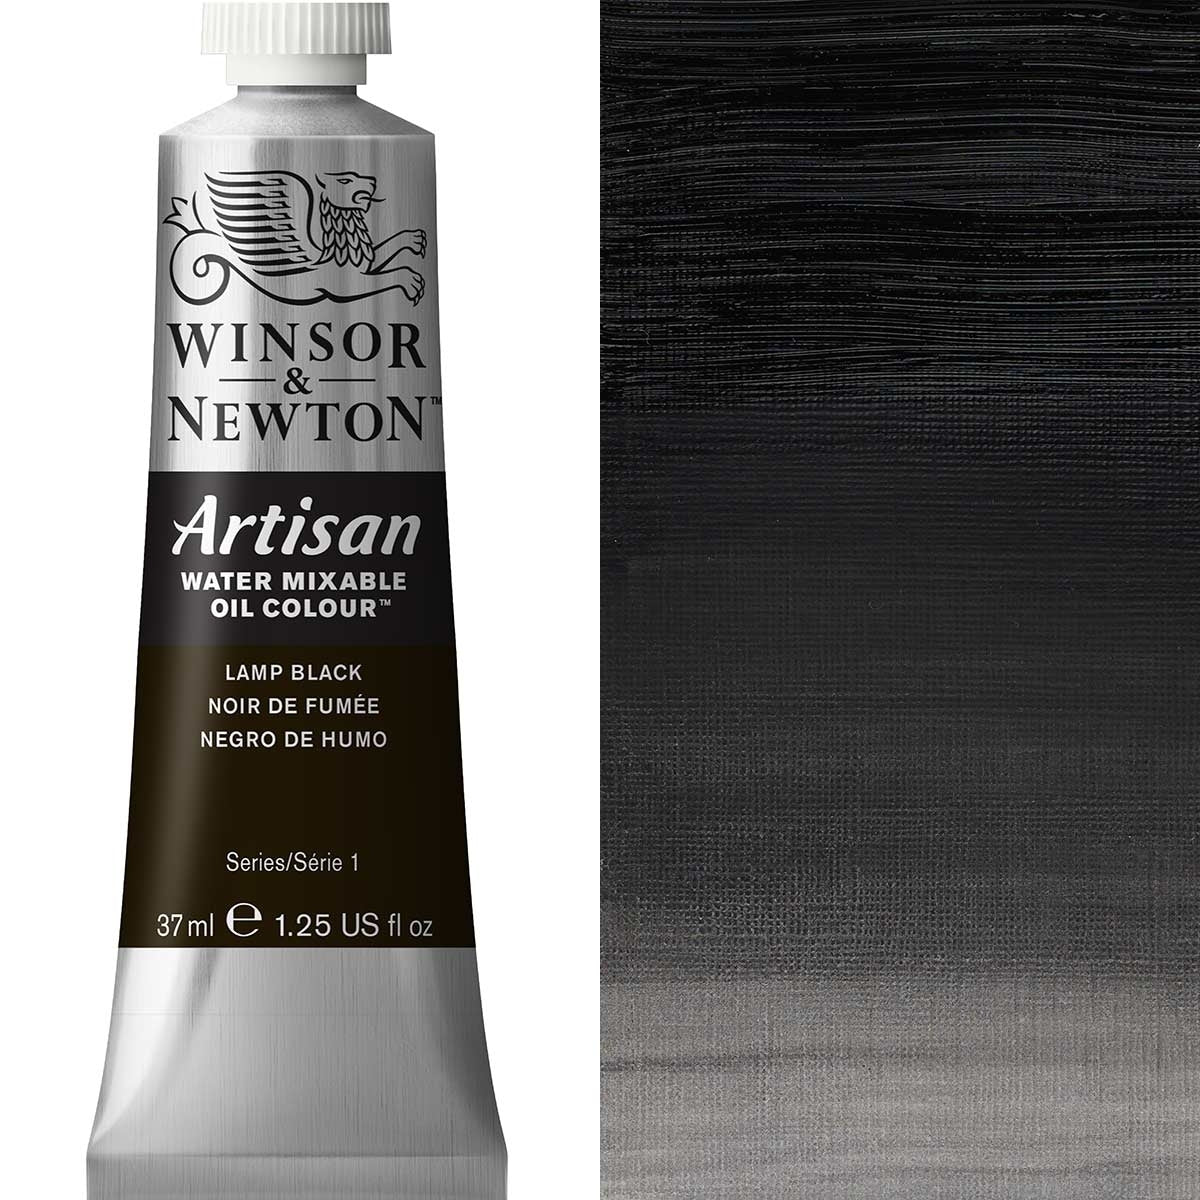 Winsor and Newton - Artisan Oil Colour Watermixable - 37ml - Lamp Black